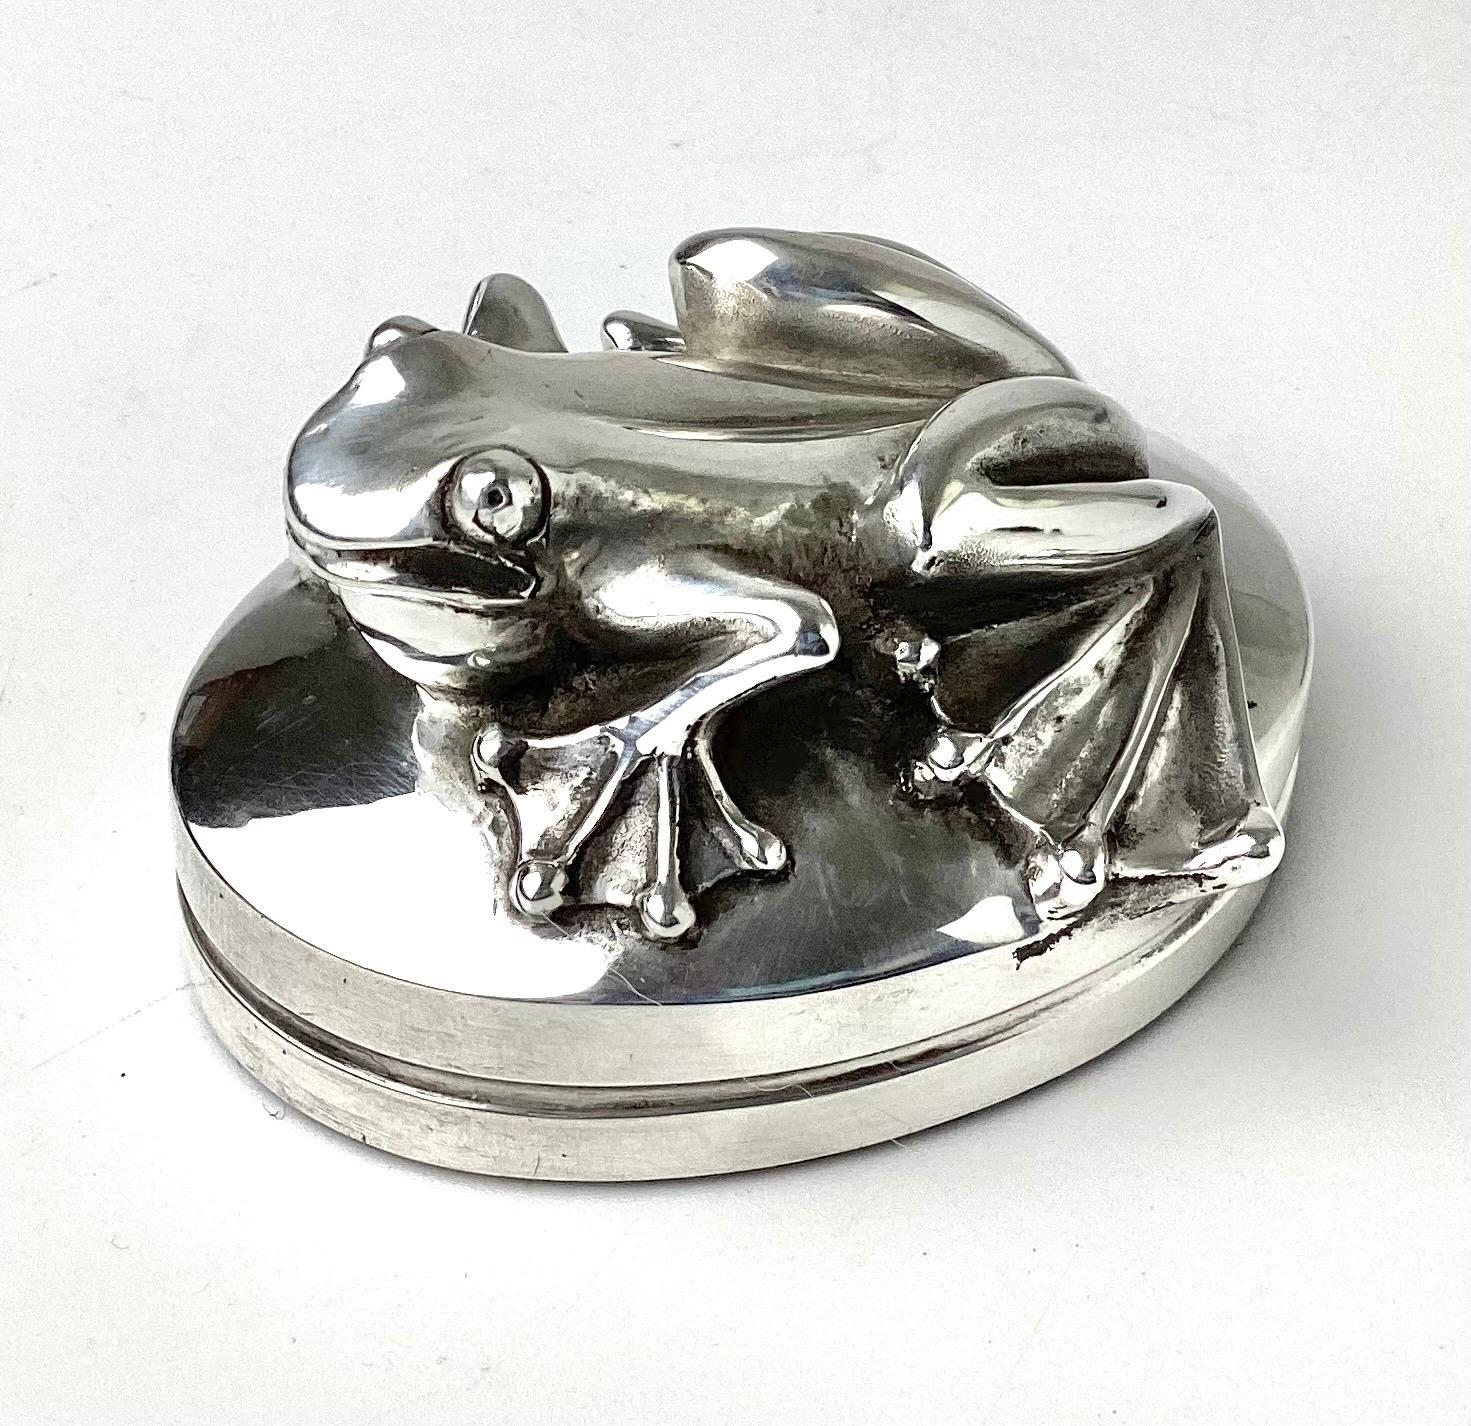 1 of 11
999 Pure Silver Repousse Frog / Toad Sculpture or Paperweight by Henryk Winograd

Sold: $408.27

Days on 1stDibs: 699
999 pure silver repousse frog or toad sculpture or paperweight by Henryk Winograd, circa 1970s. The piece is 2.75